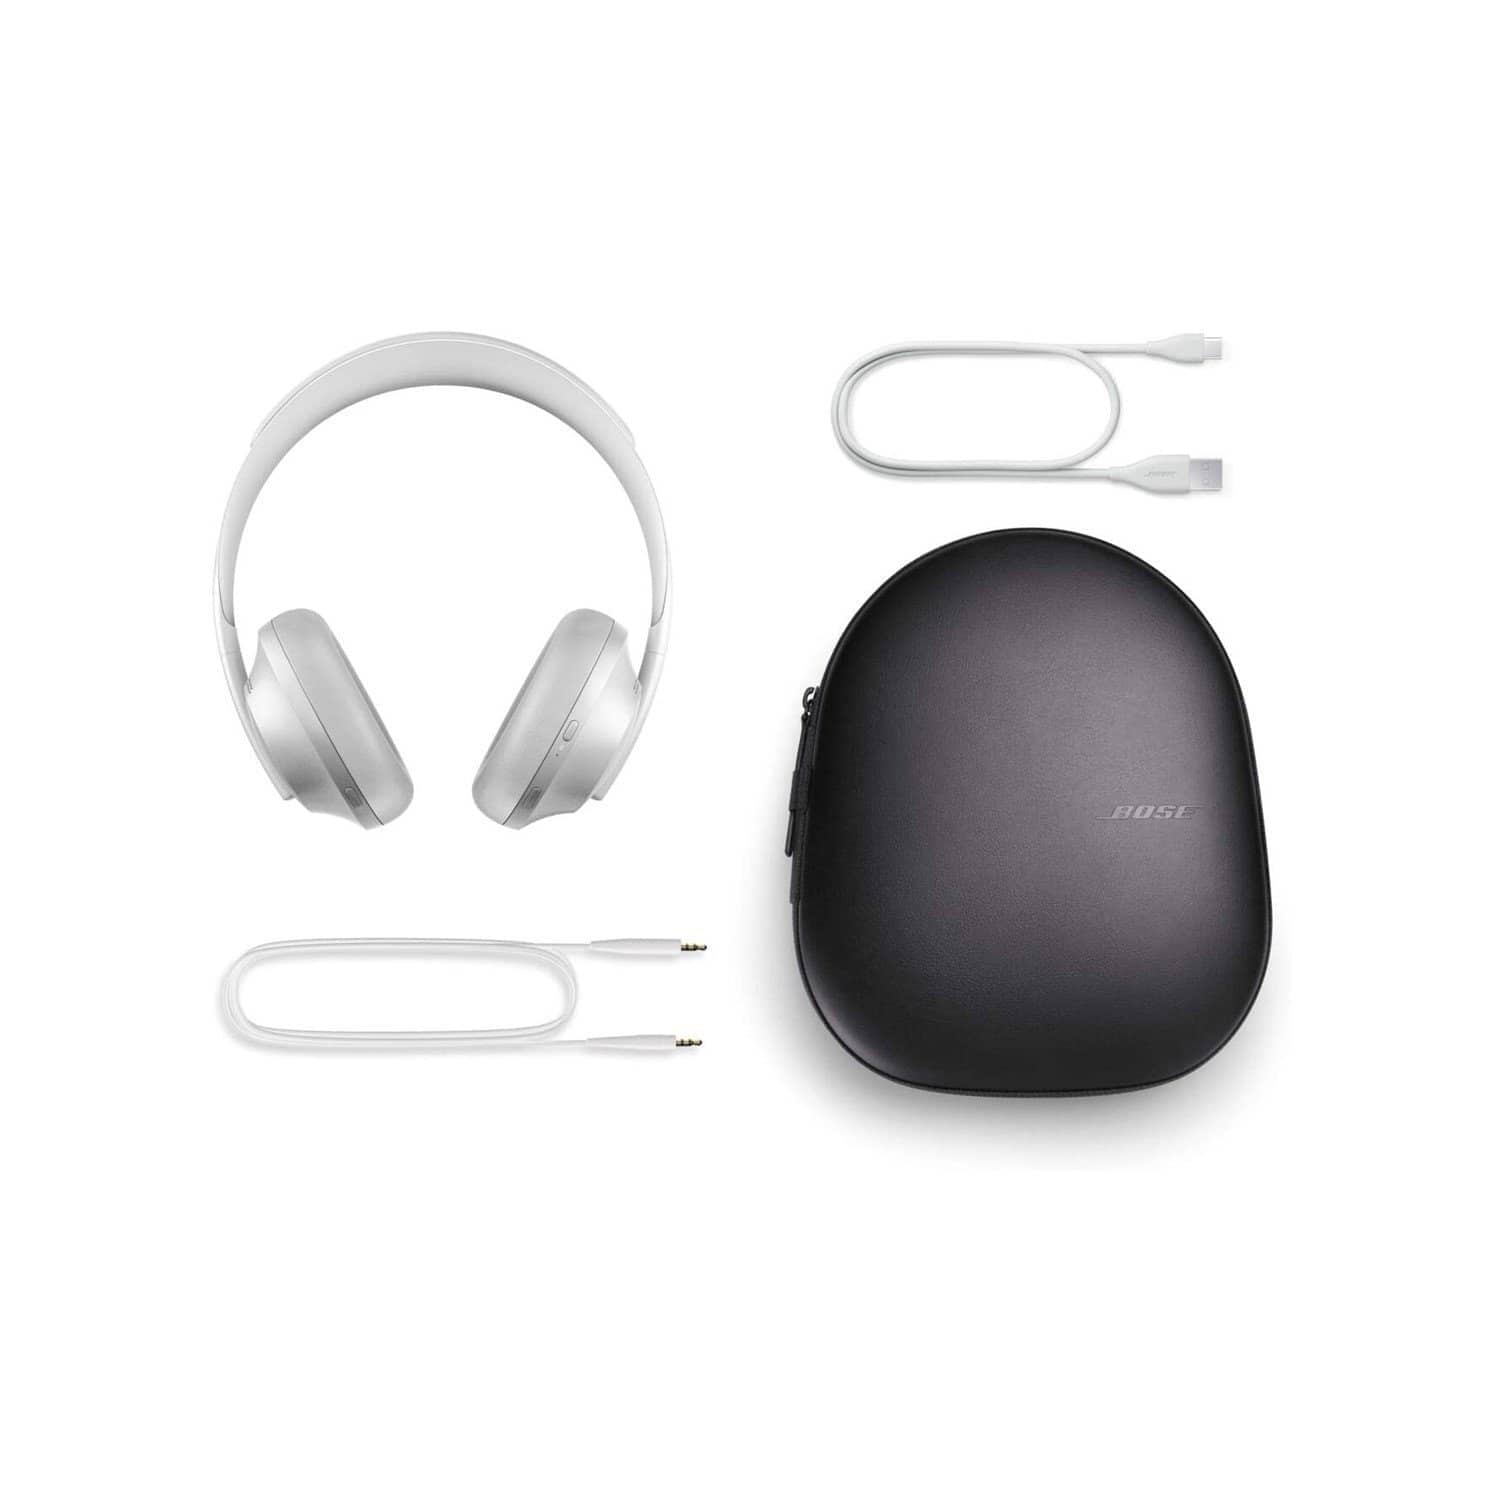 Bose Noise Cancelling 700 Wireless Headphones